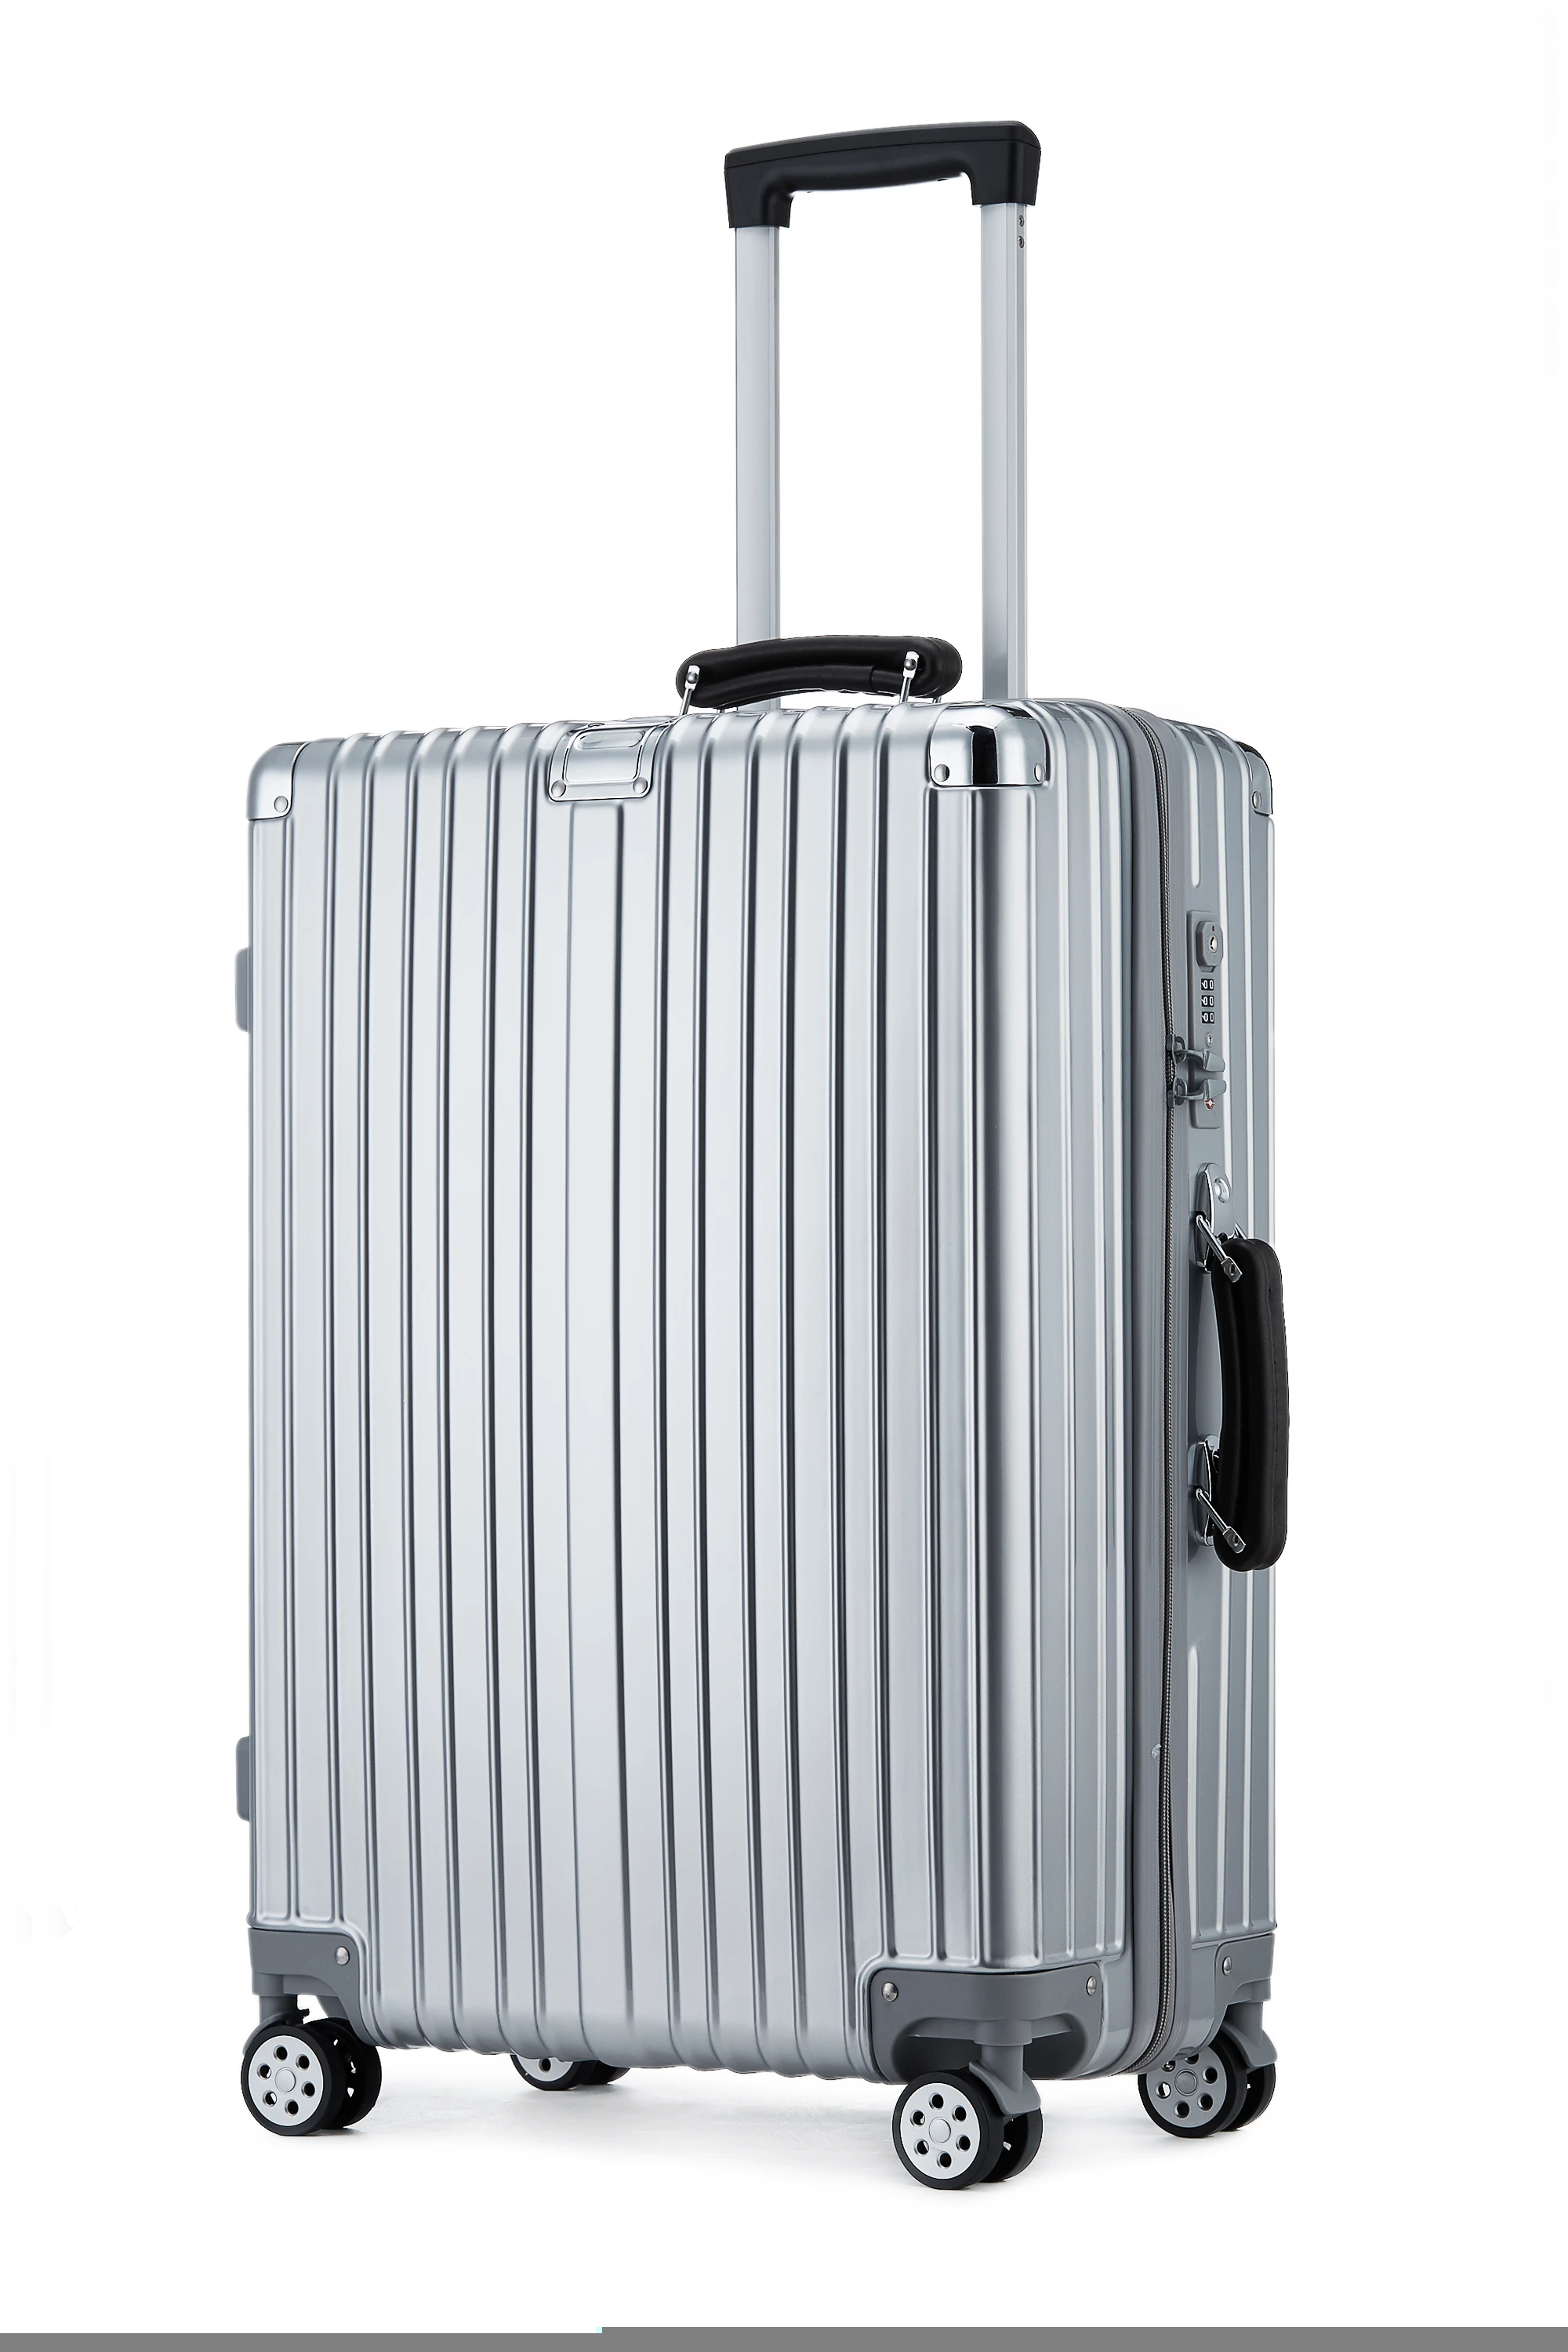 trolley bags travel trolley luggage ABS/ PC travel luggage hot selling among young people